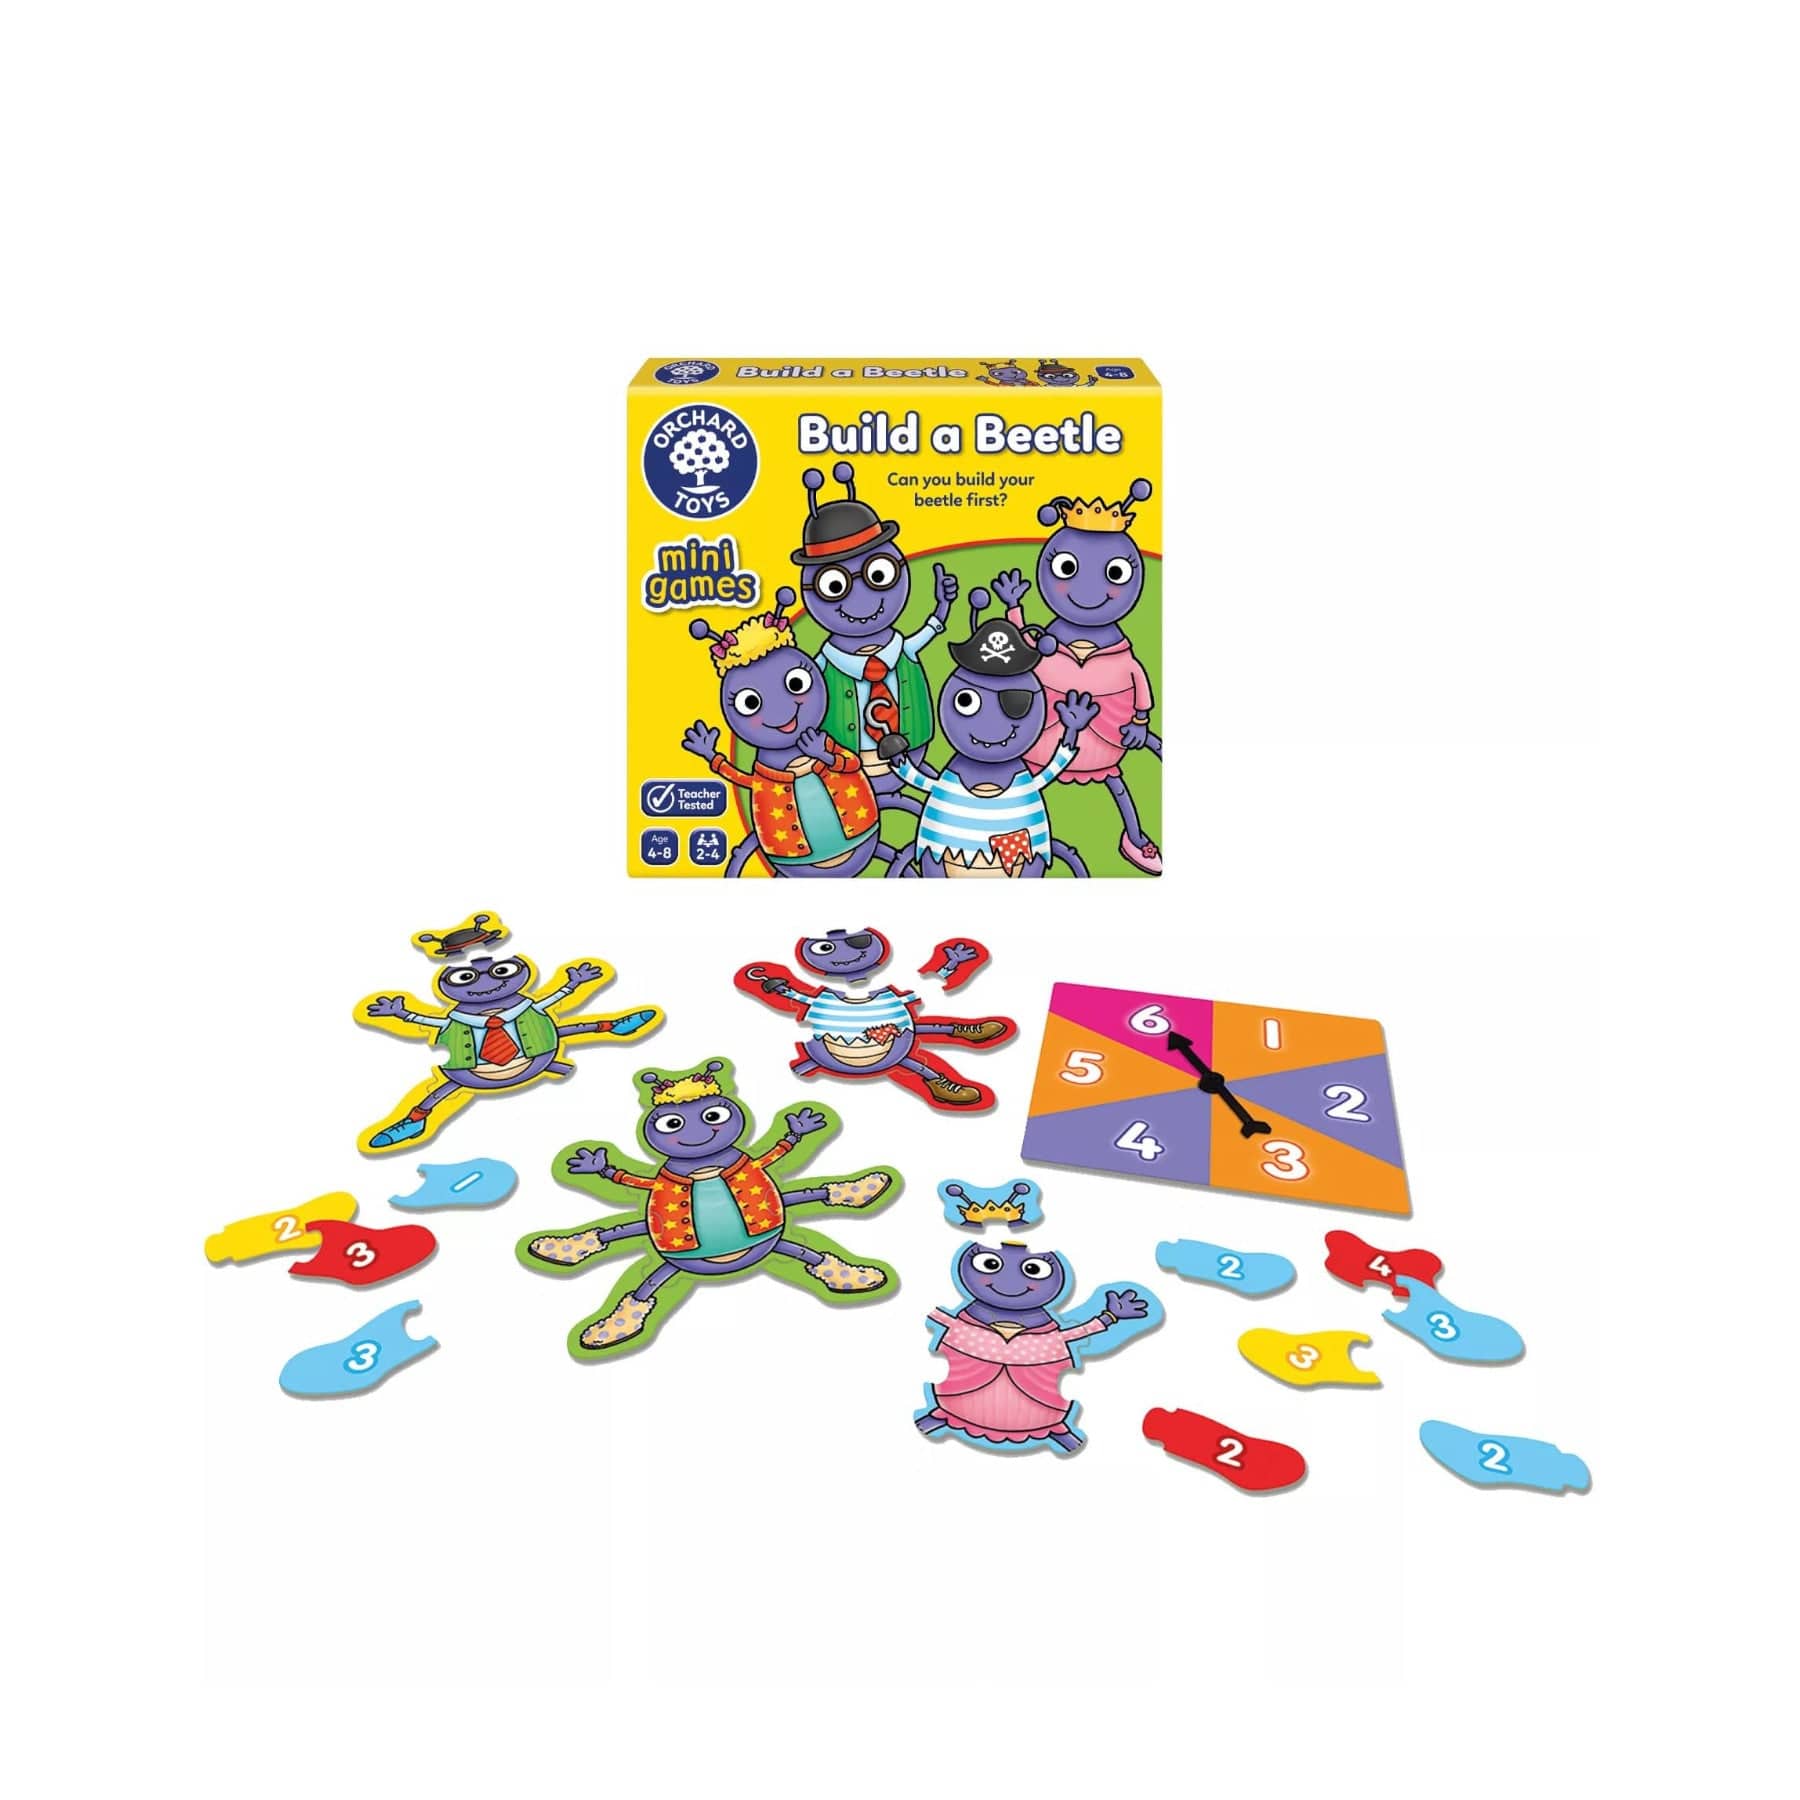 Children's board game Build a Beetle with colorful beetle pieces and number cards spread out on white background